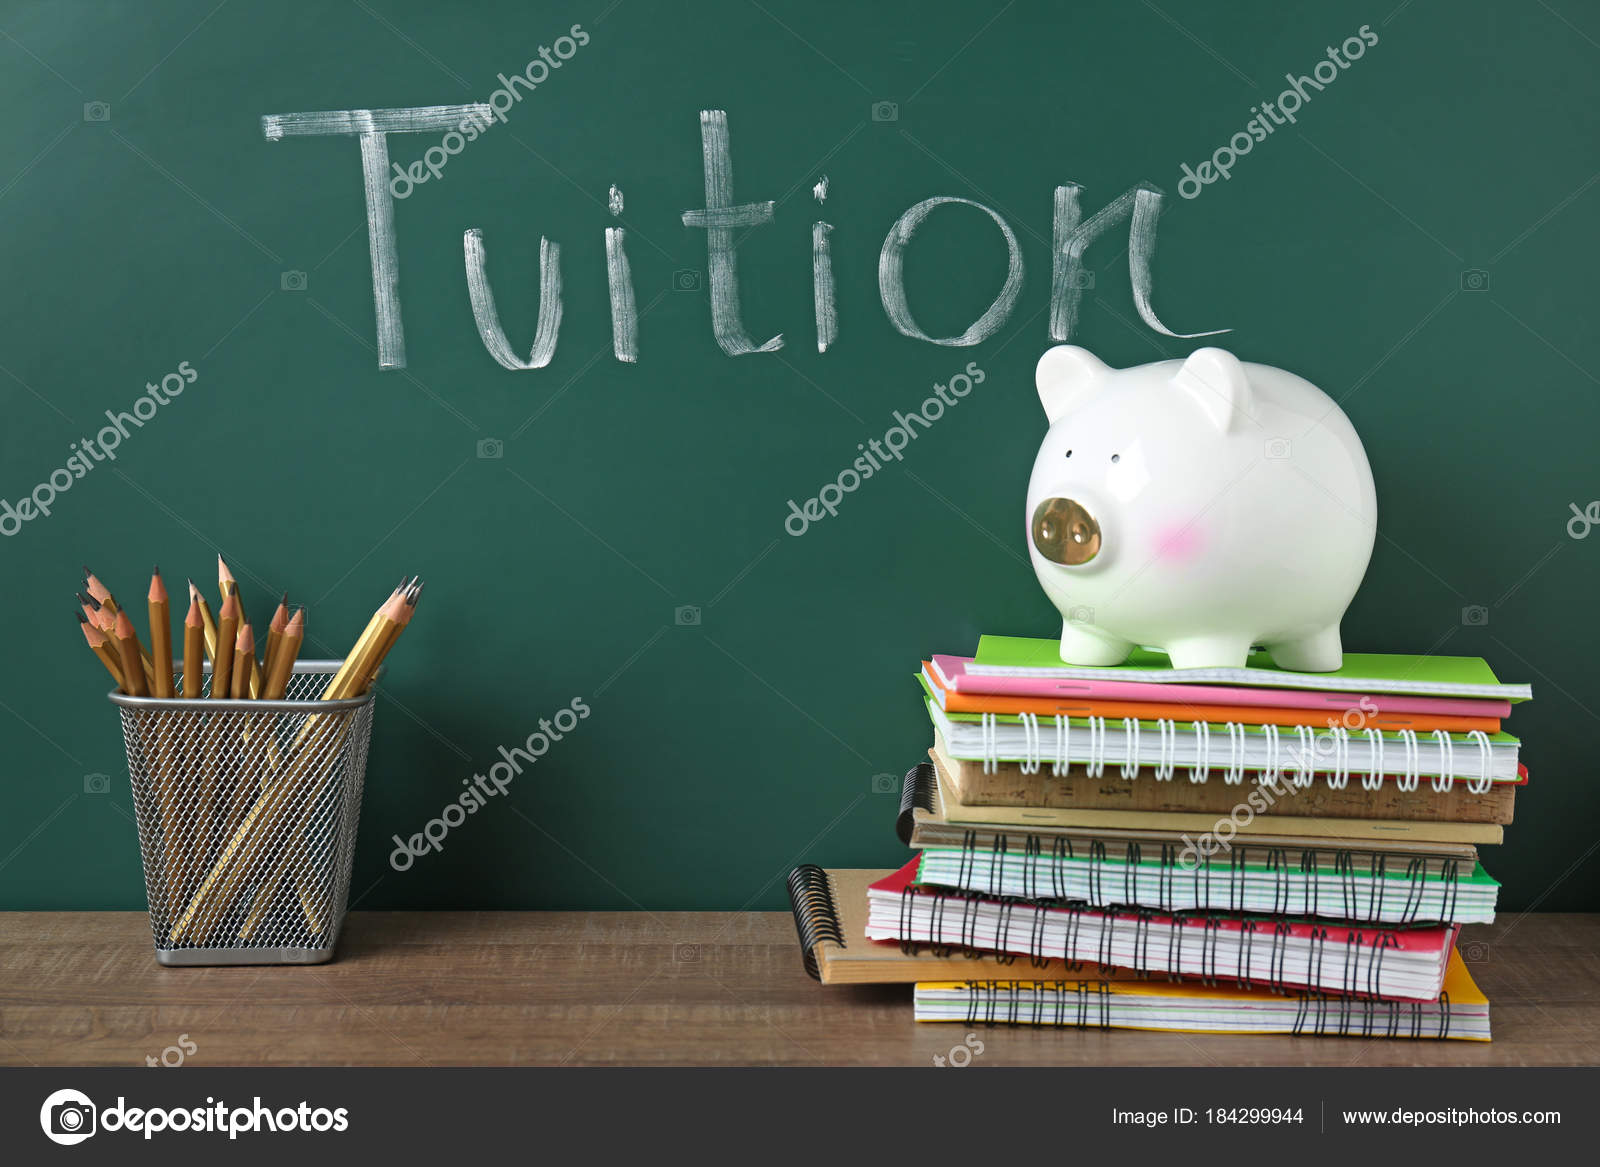 Tuition Stock Photos, Royalty Free Tuition Images | Depositphotos